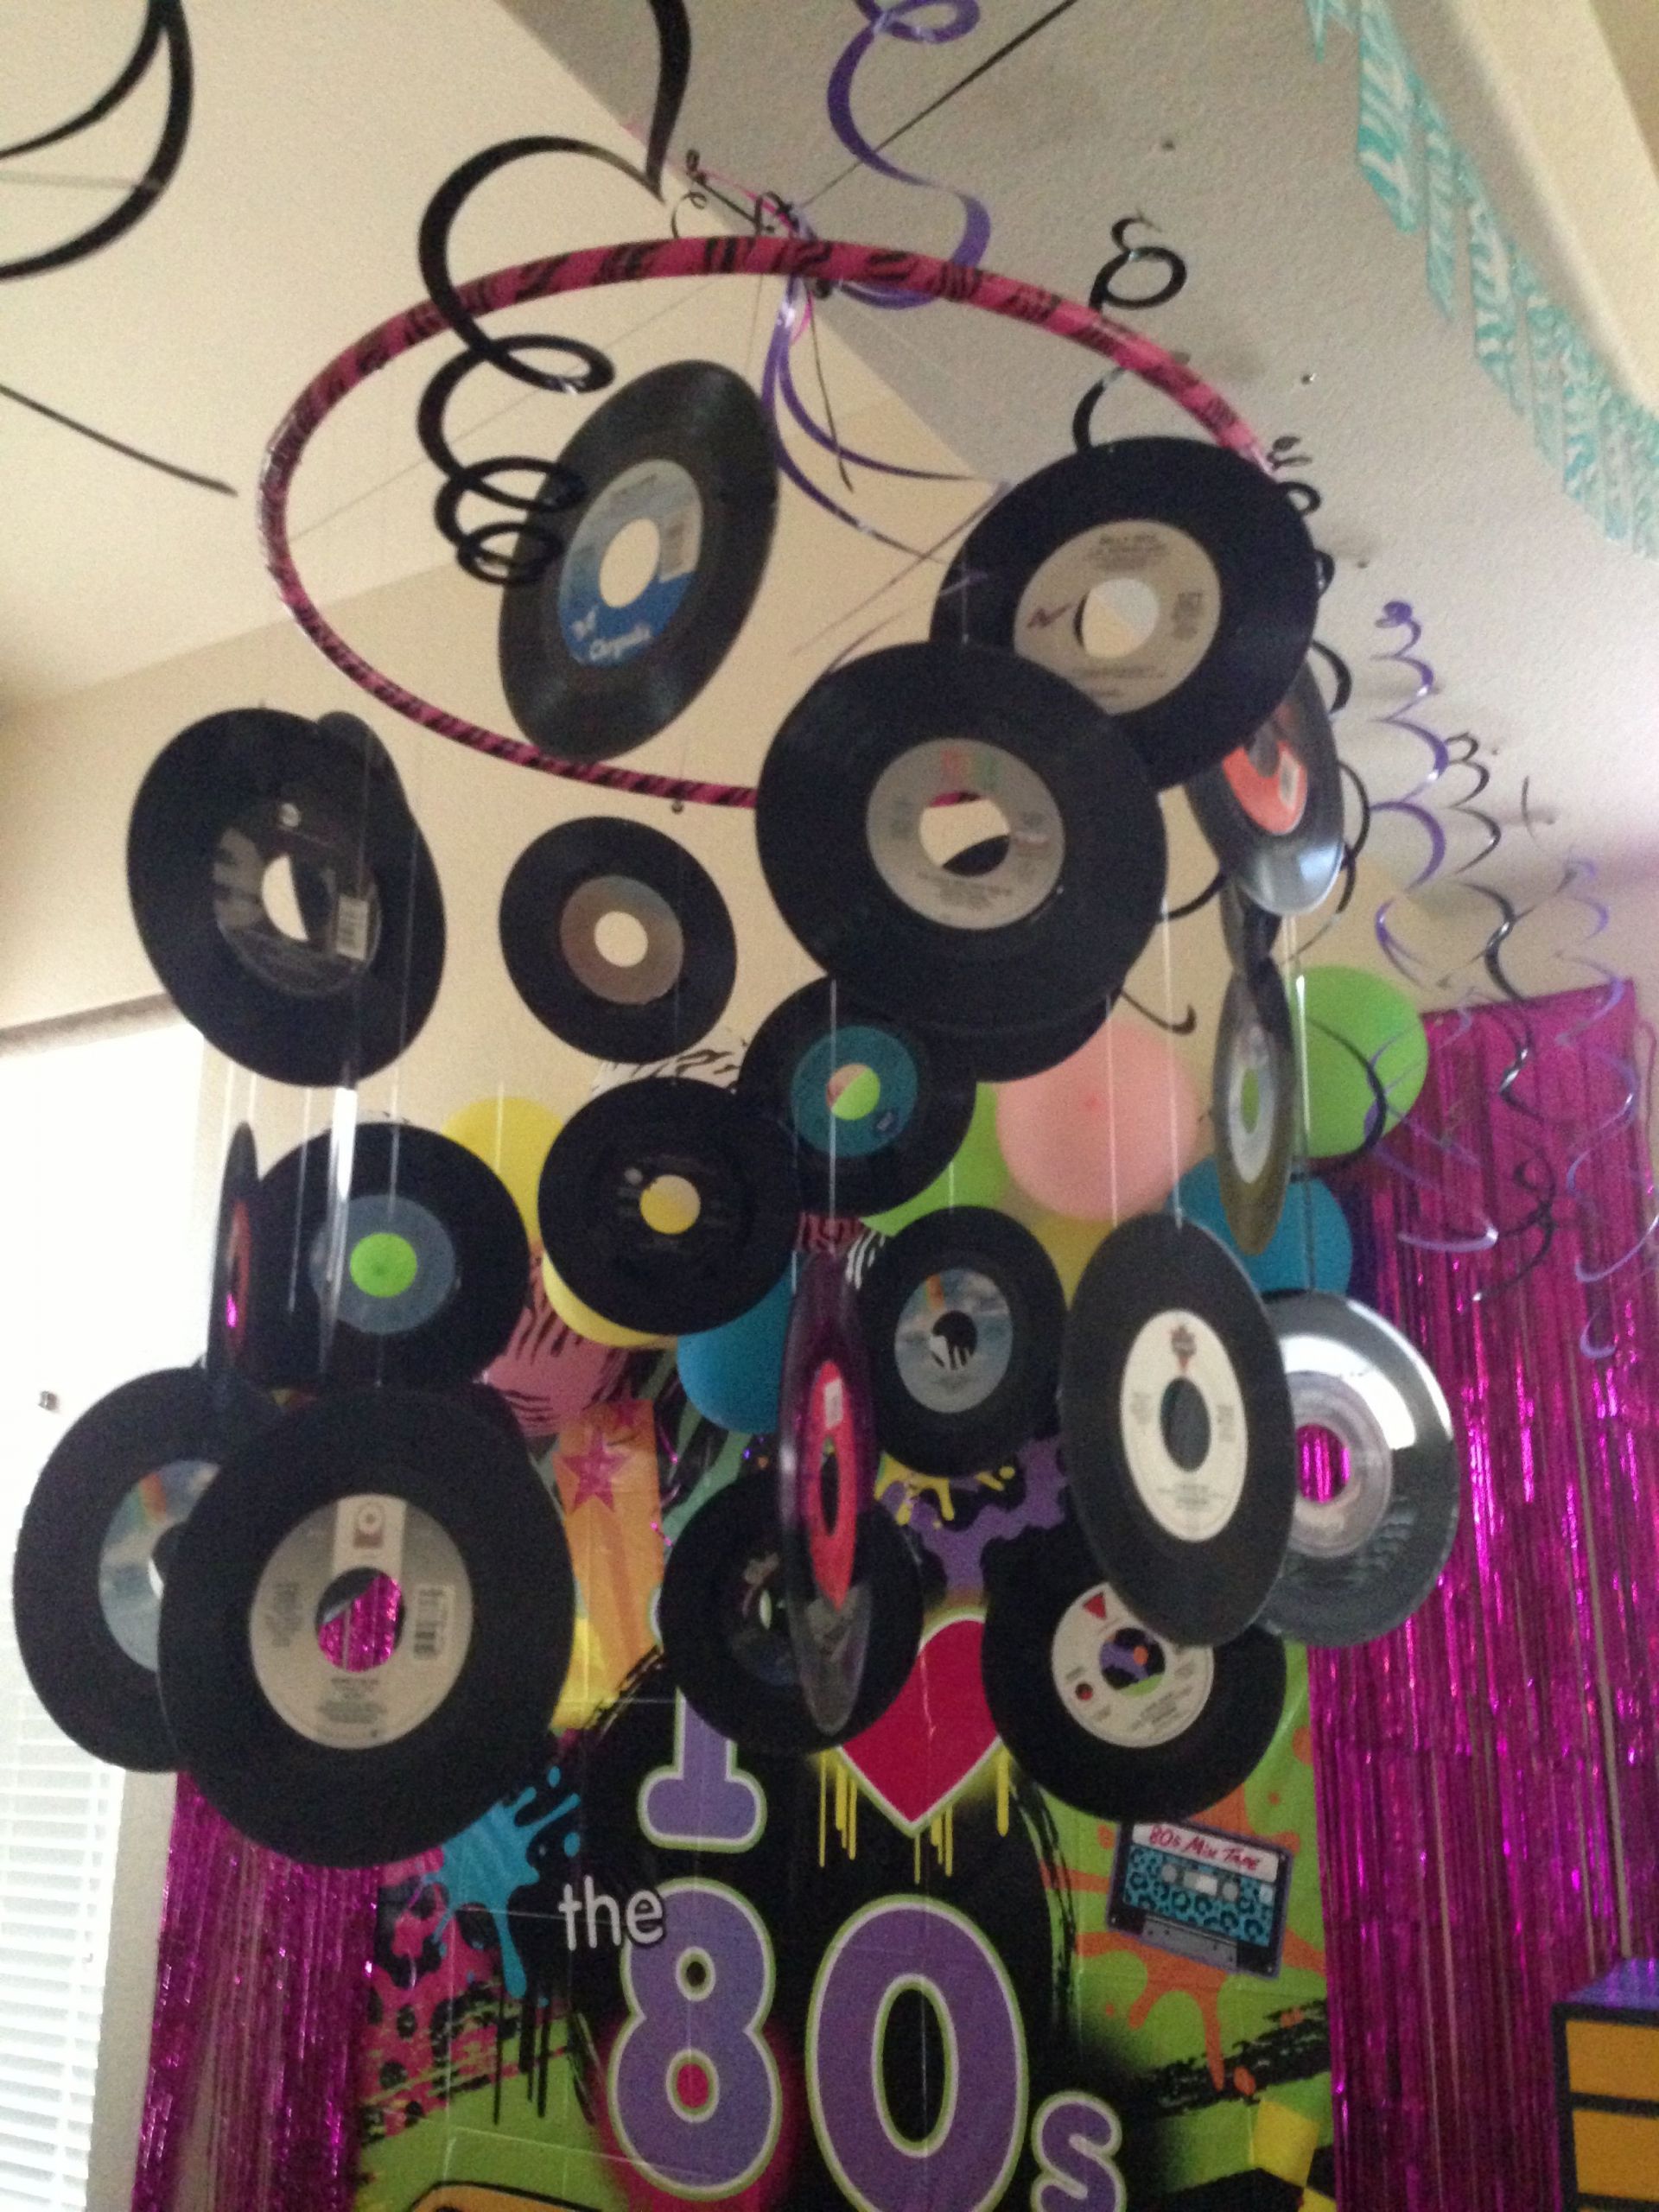 80S Party Decorations DIY
 My 80 s party decorations 45 rpm record chandelier